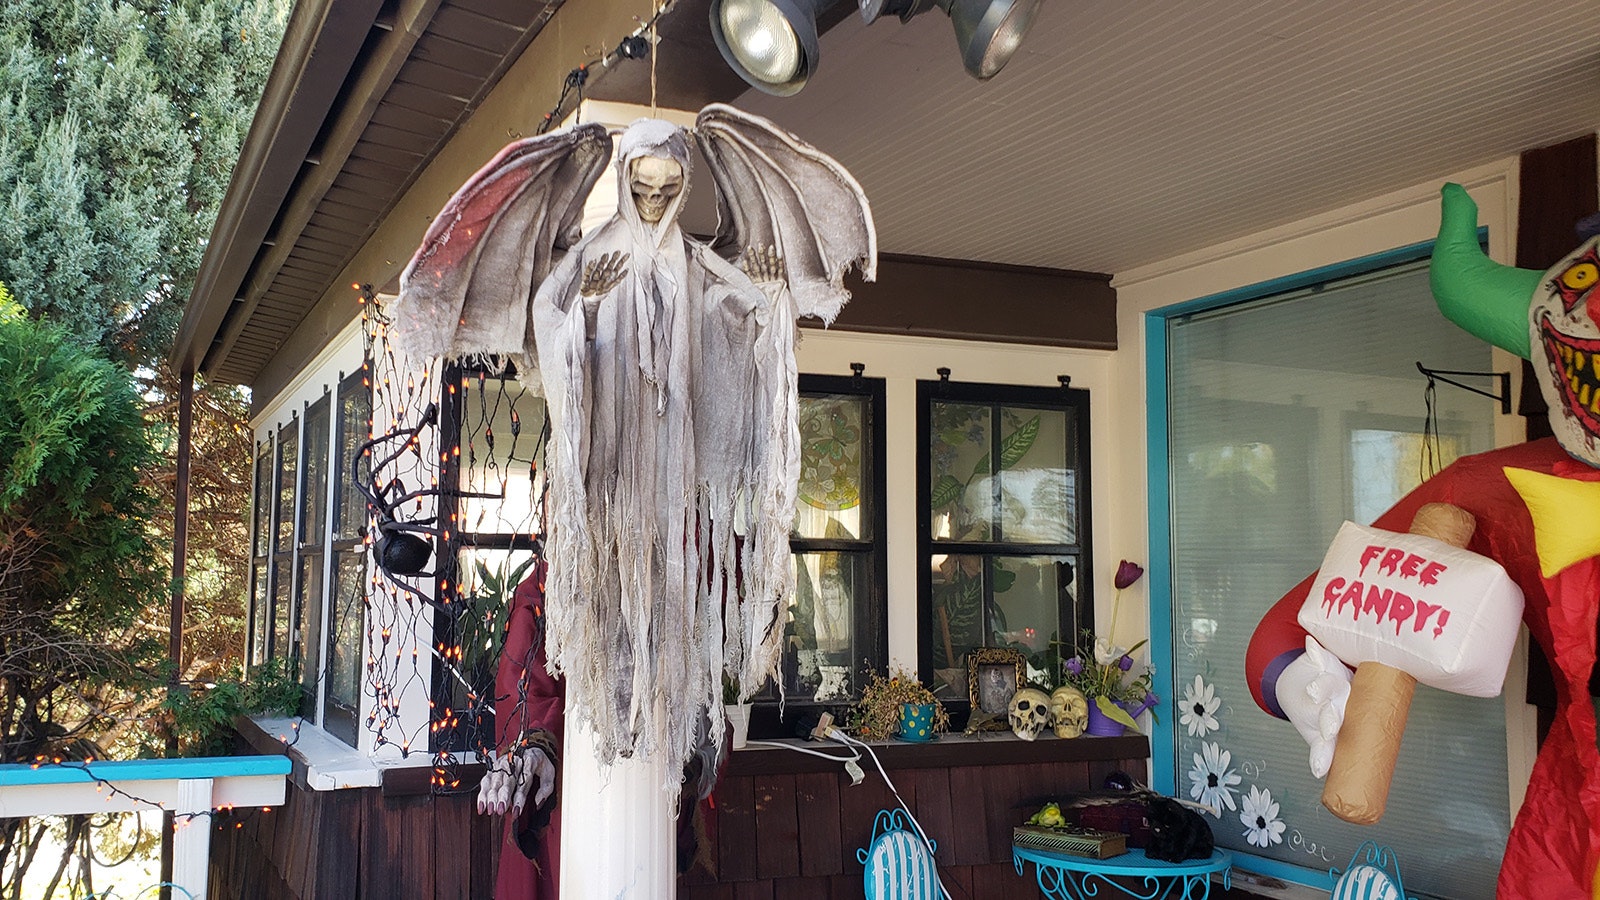 More scene-setting decorations at Desiree Ross' shop in Worland.